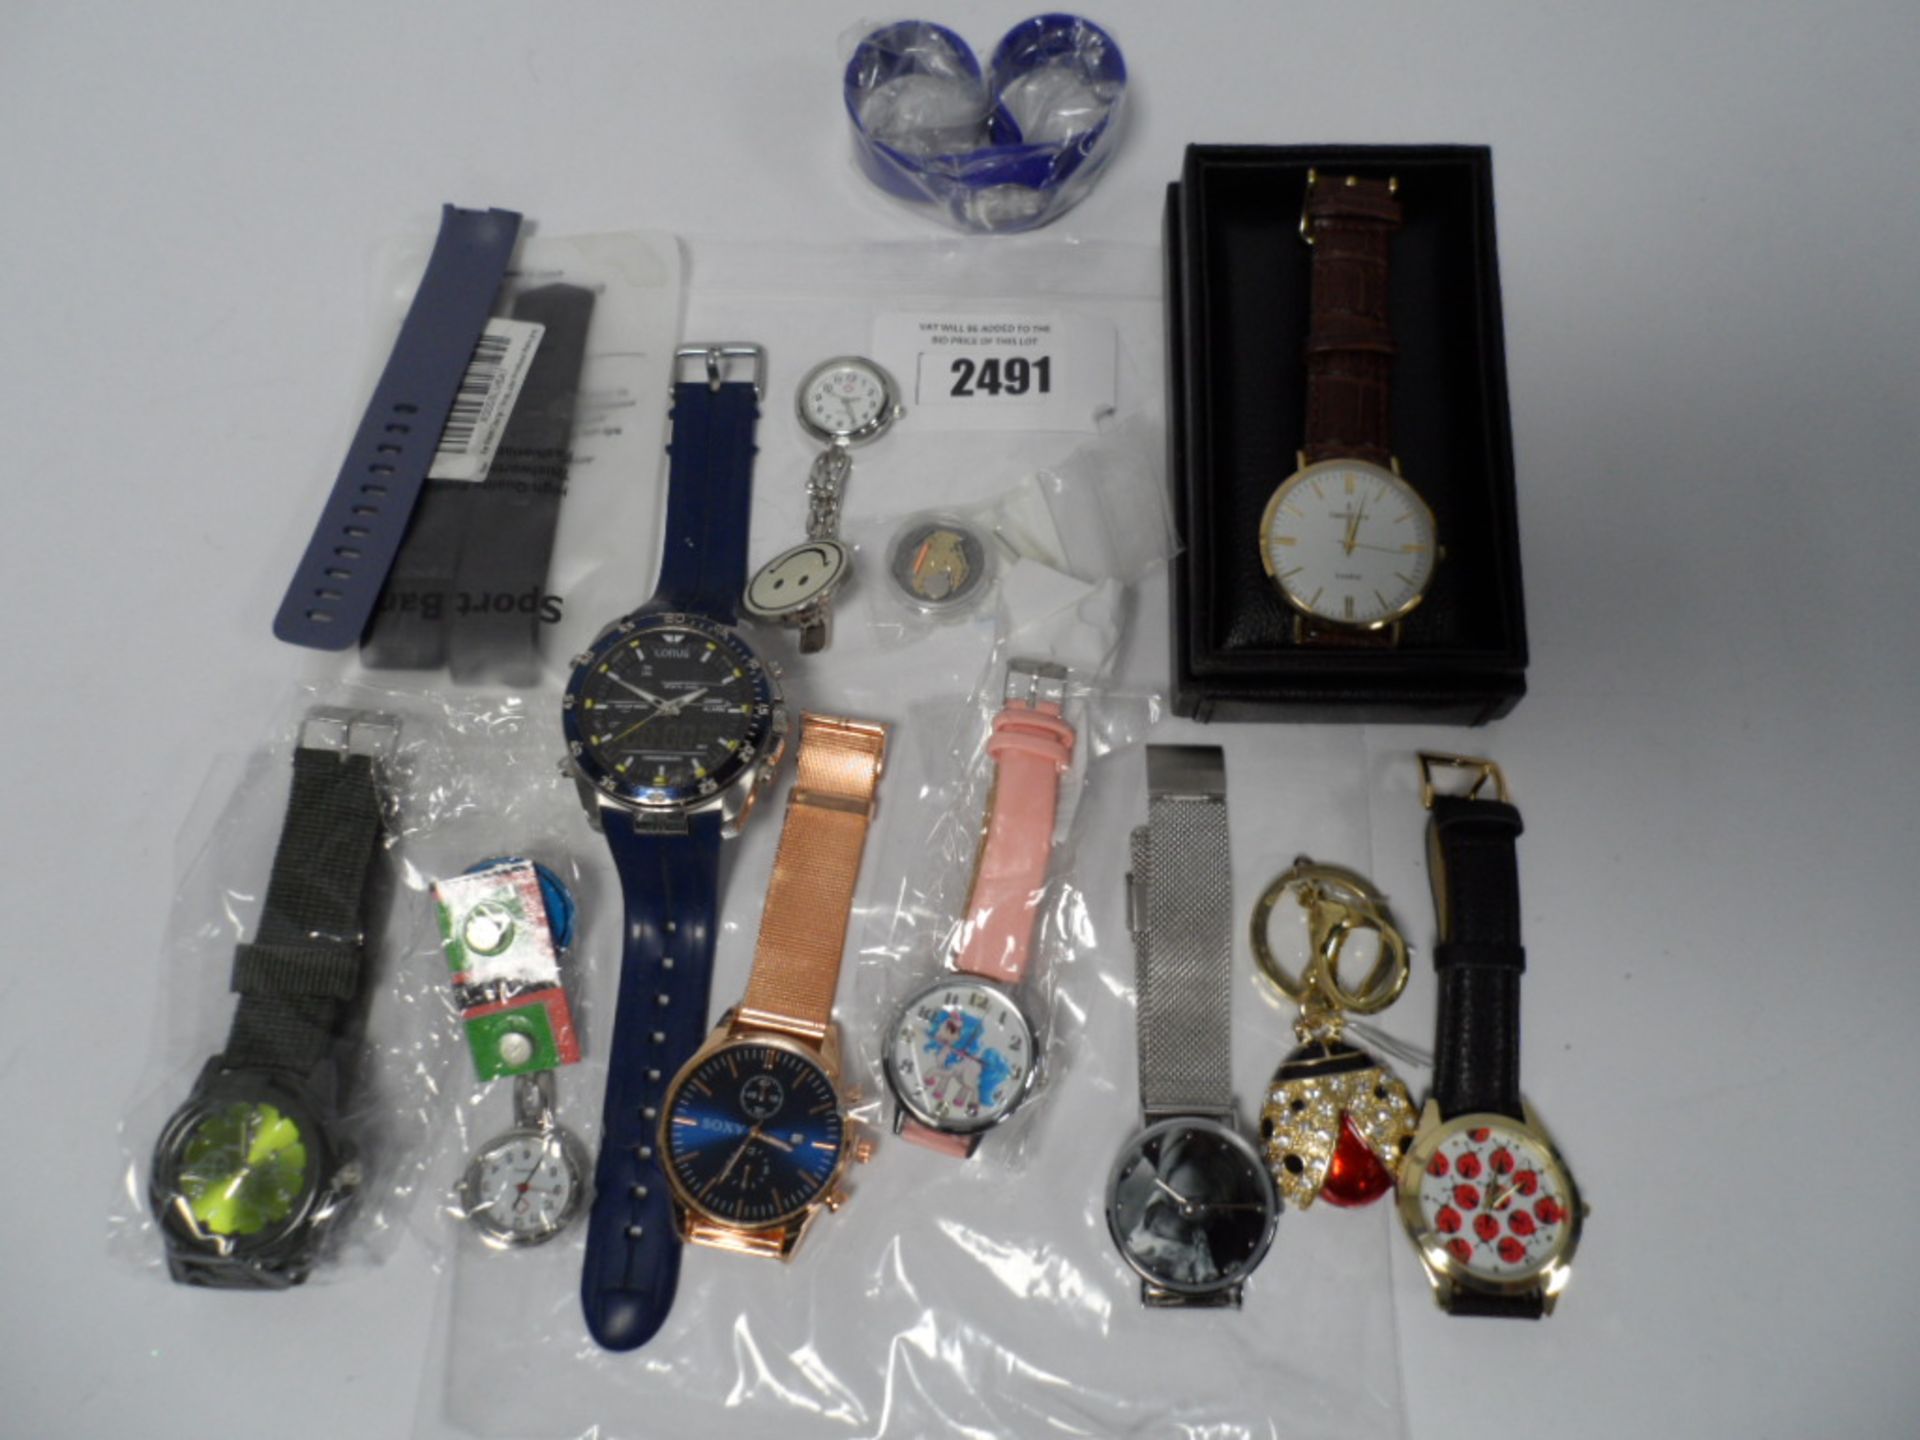 Bag of various loose watches including Lorus, soxy, etc